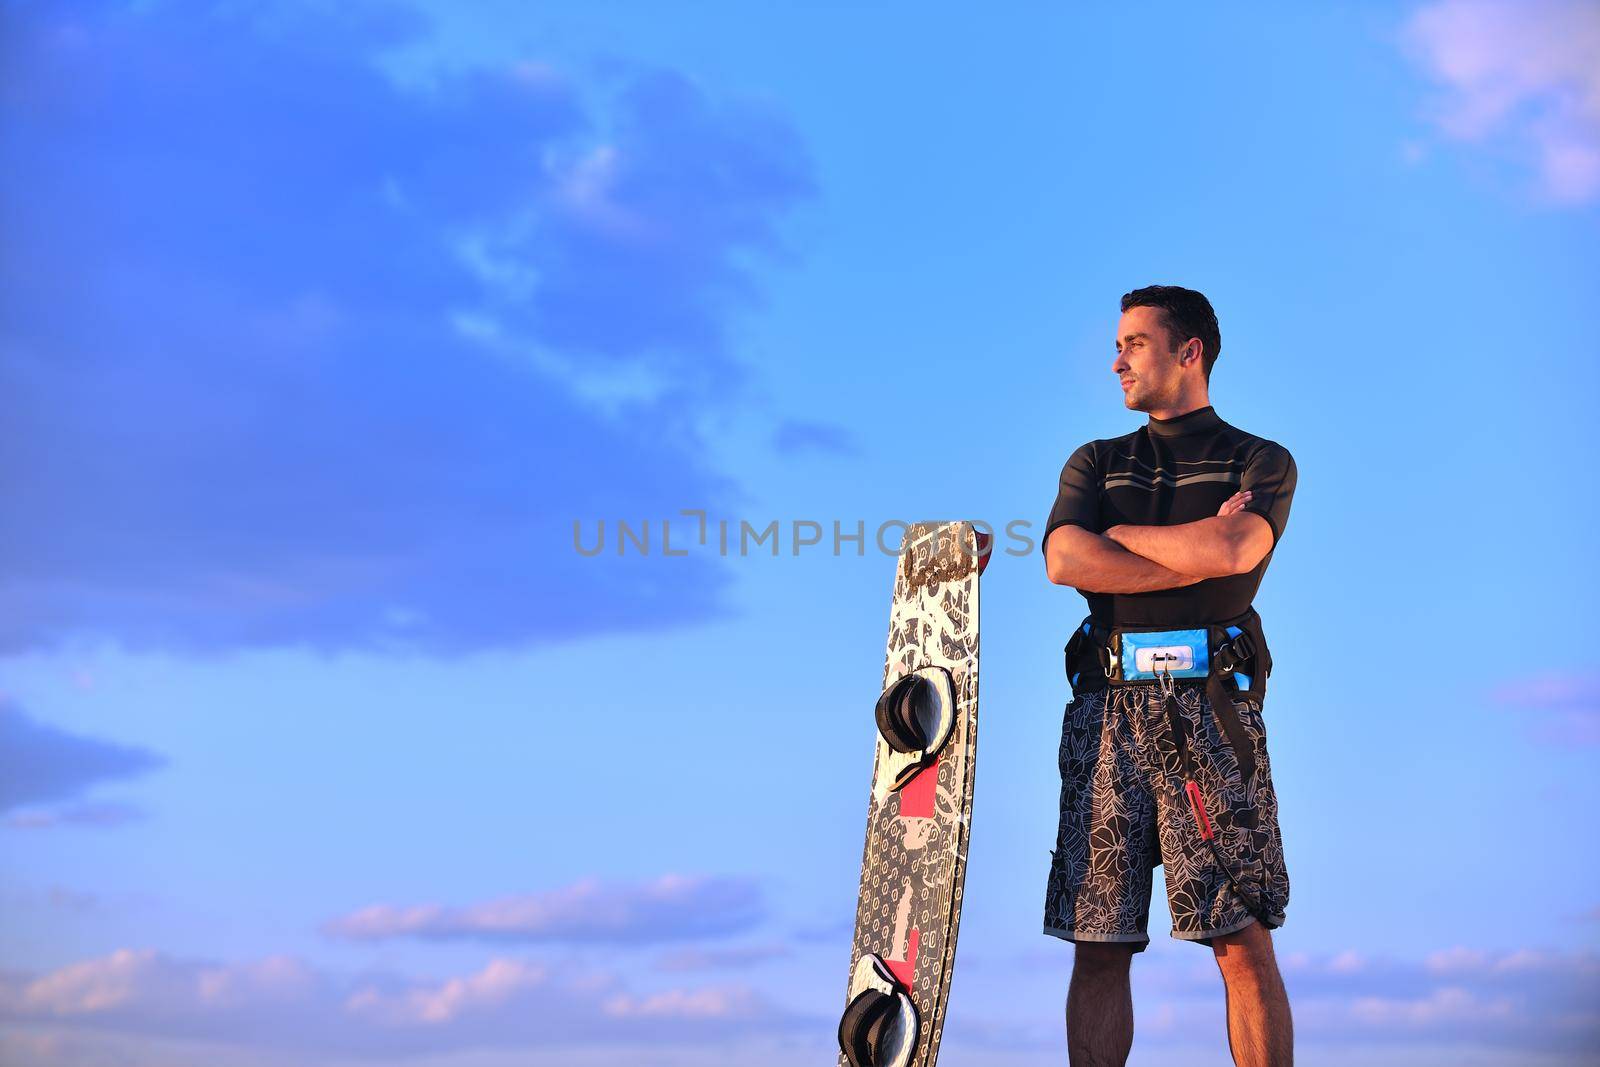 Portrait of a strong young  surf  man at beach on sunset in a contemplative mood with a surfboard